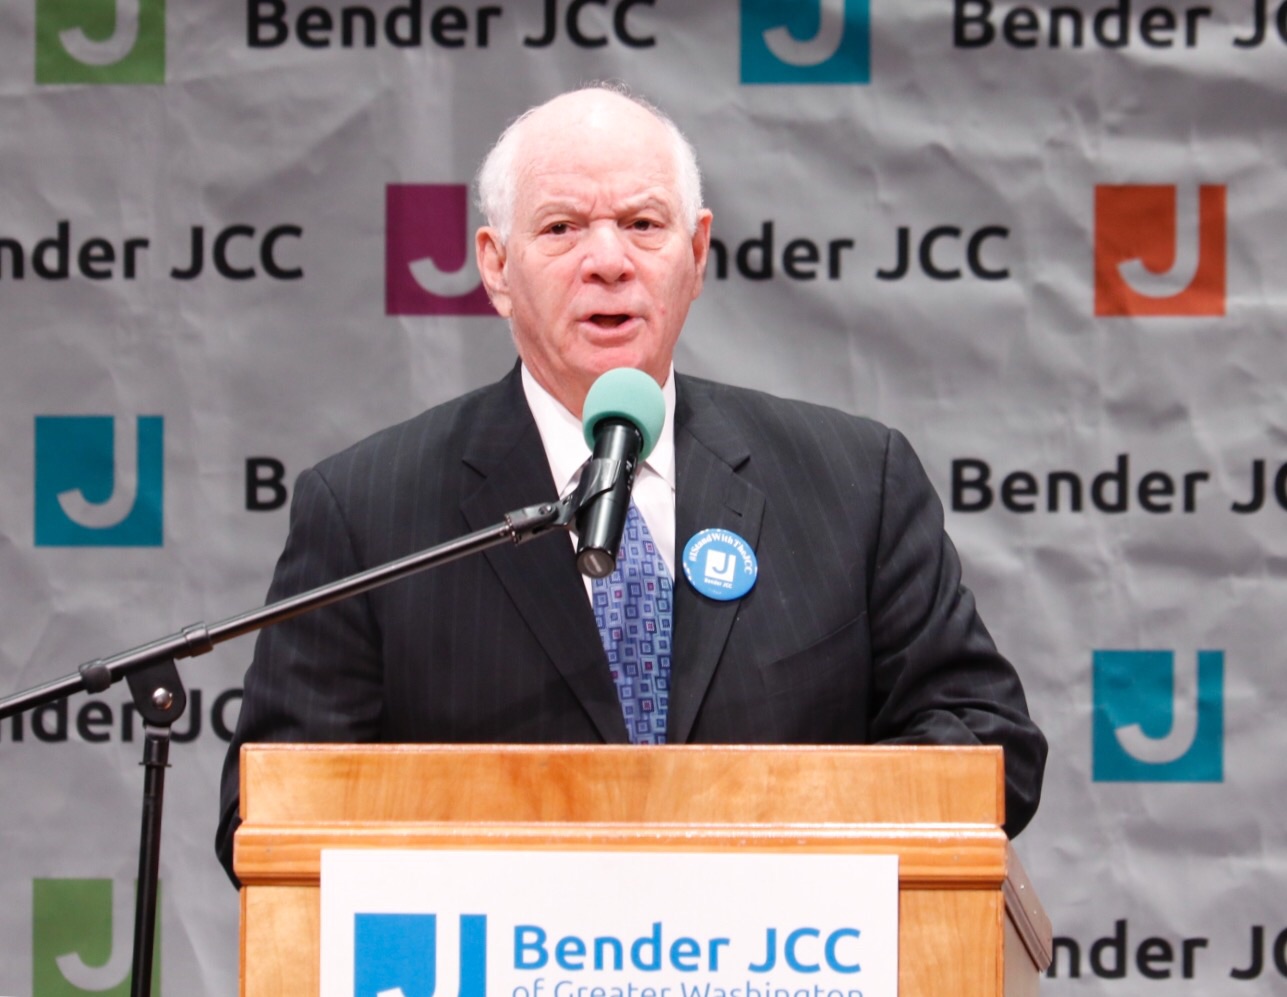 Sen. Ben Cardin speaks at solidarity event Friday morning at the Bender Jewish Community Center in Rockville, Maryland. (WTOP?Kate Ryan)